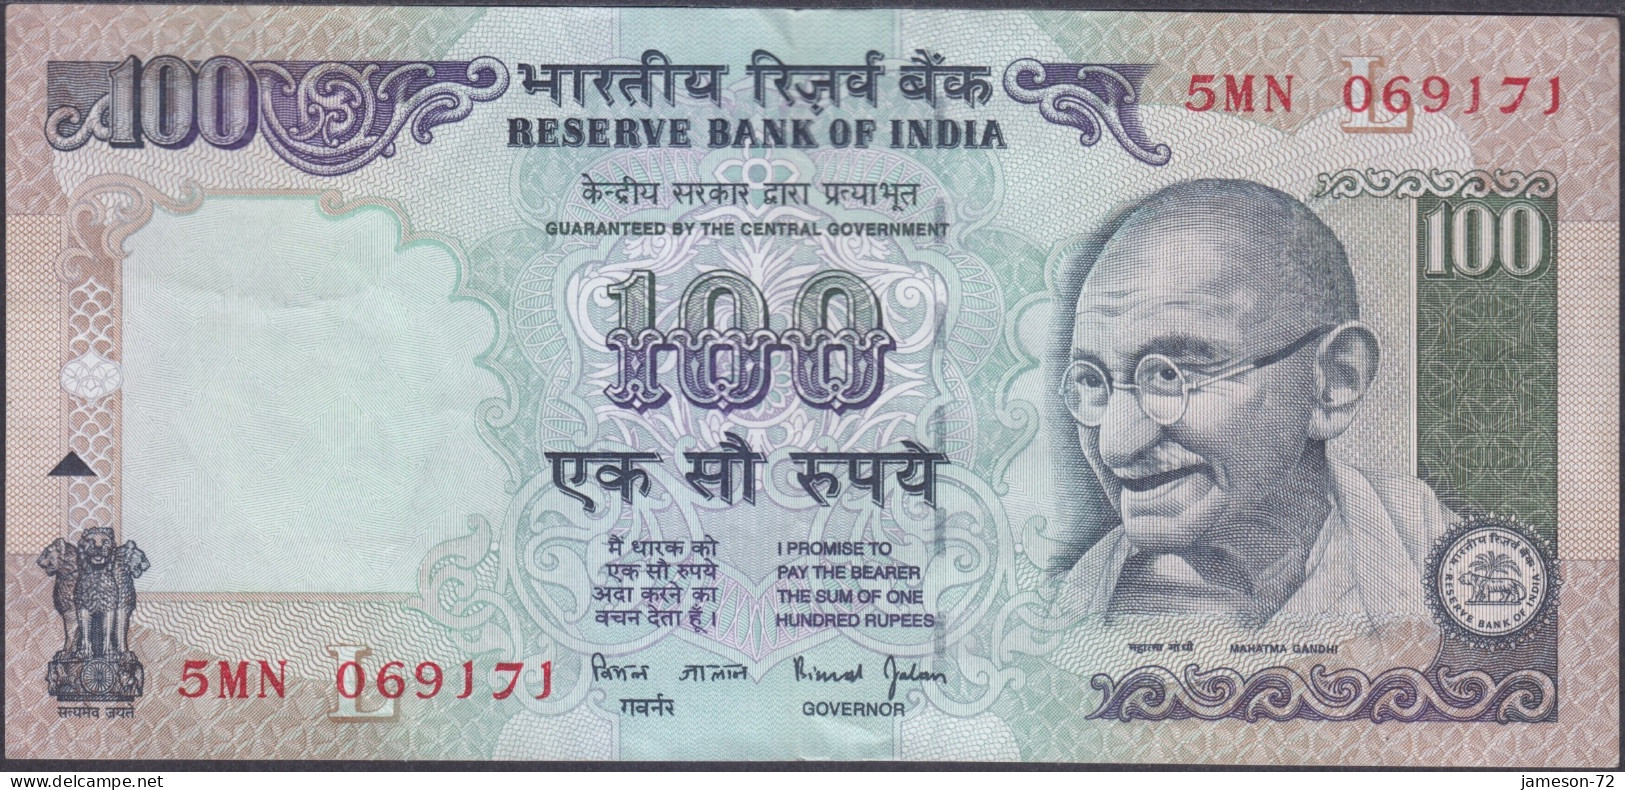 INDIA - 100 Rupees ND (1996) P# 91 Asia Banknote - Edelweiss Coins - India